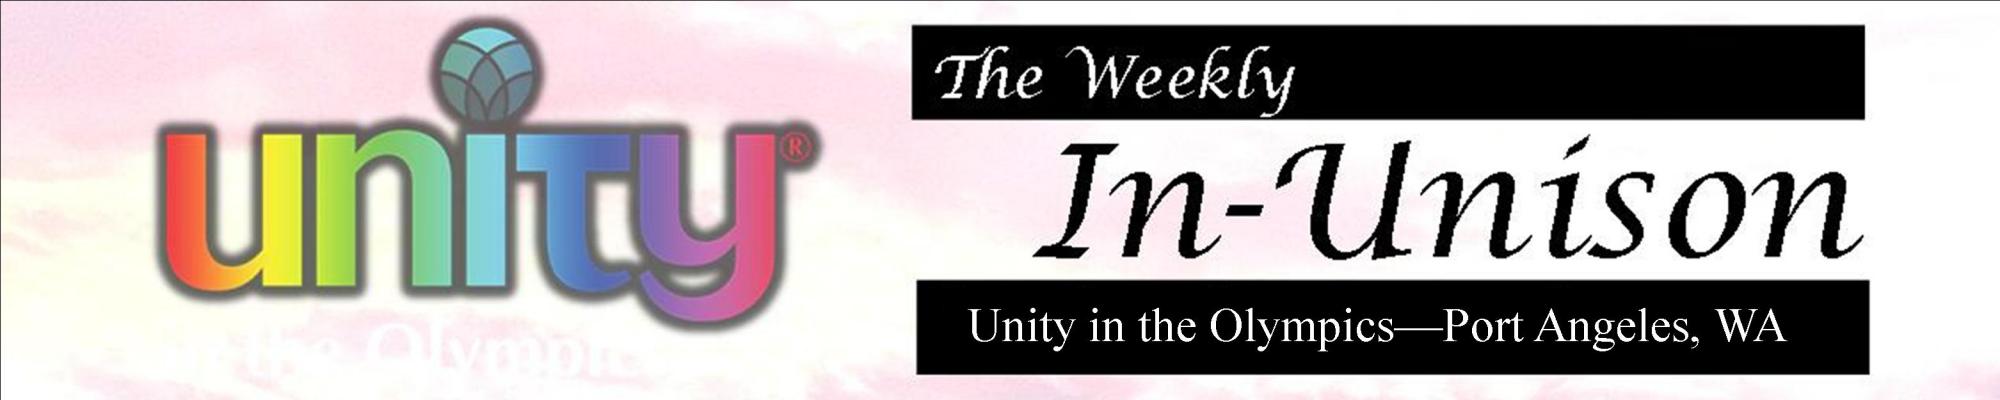 The Weekly IN-UNISON January 31st Edition